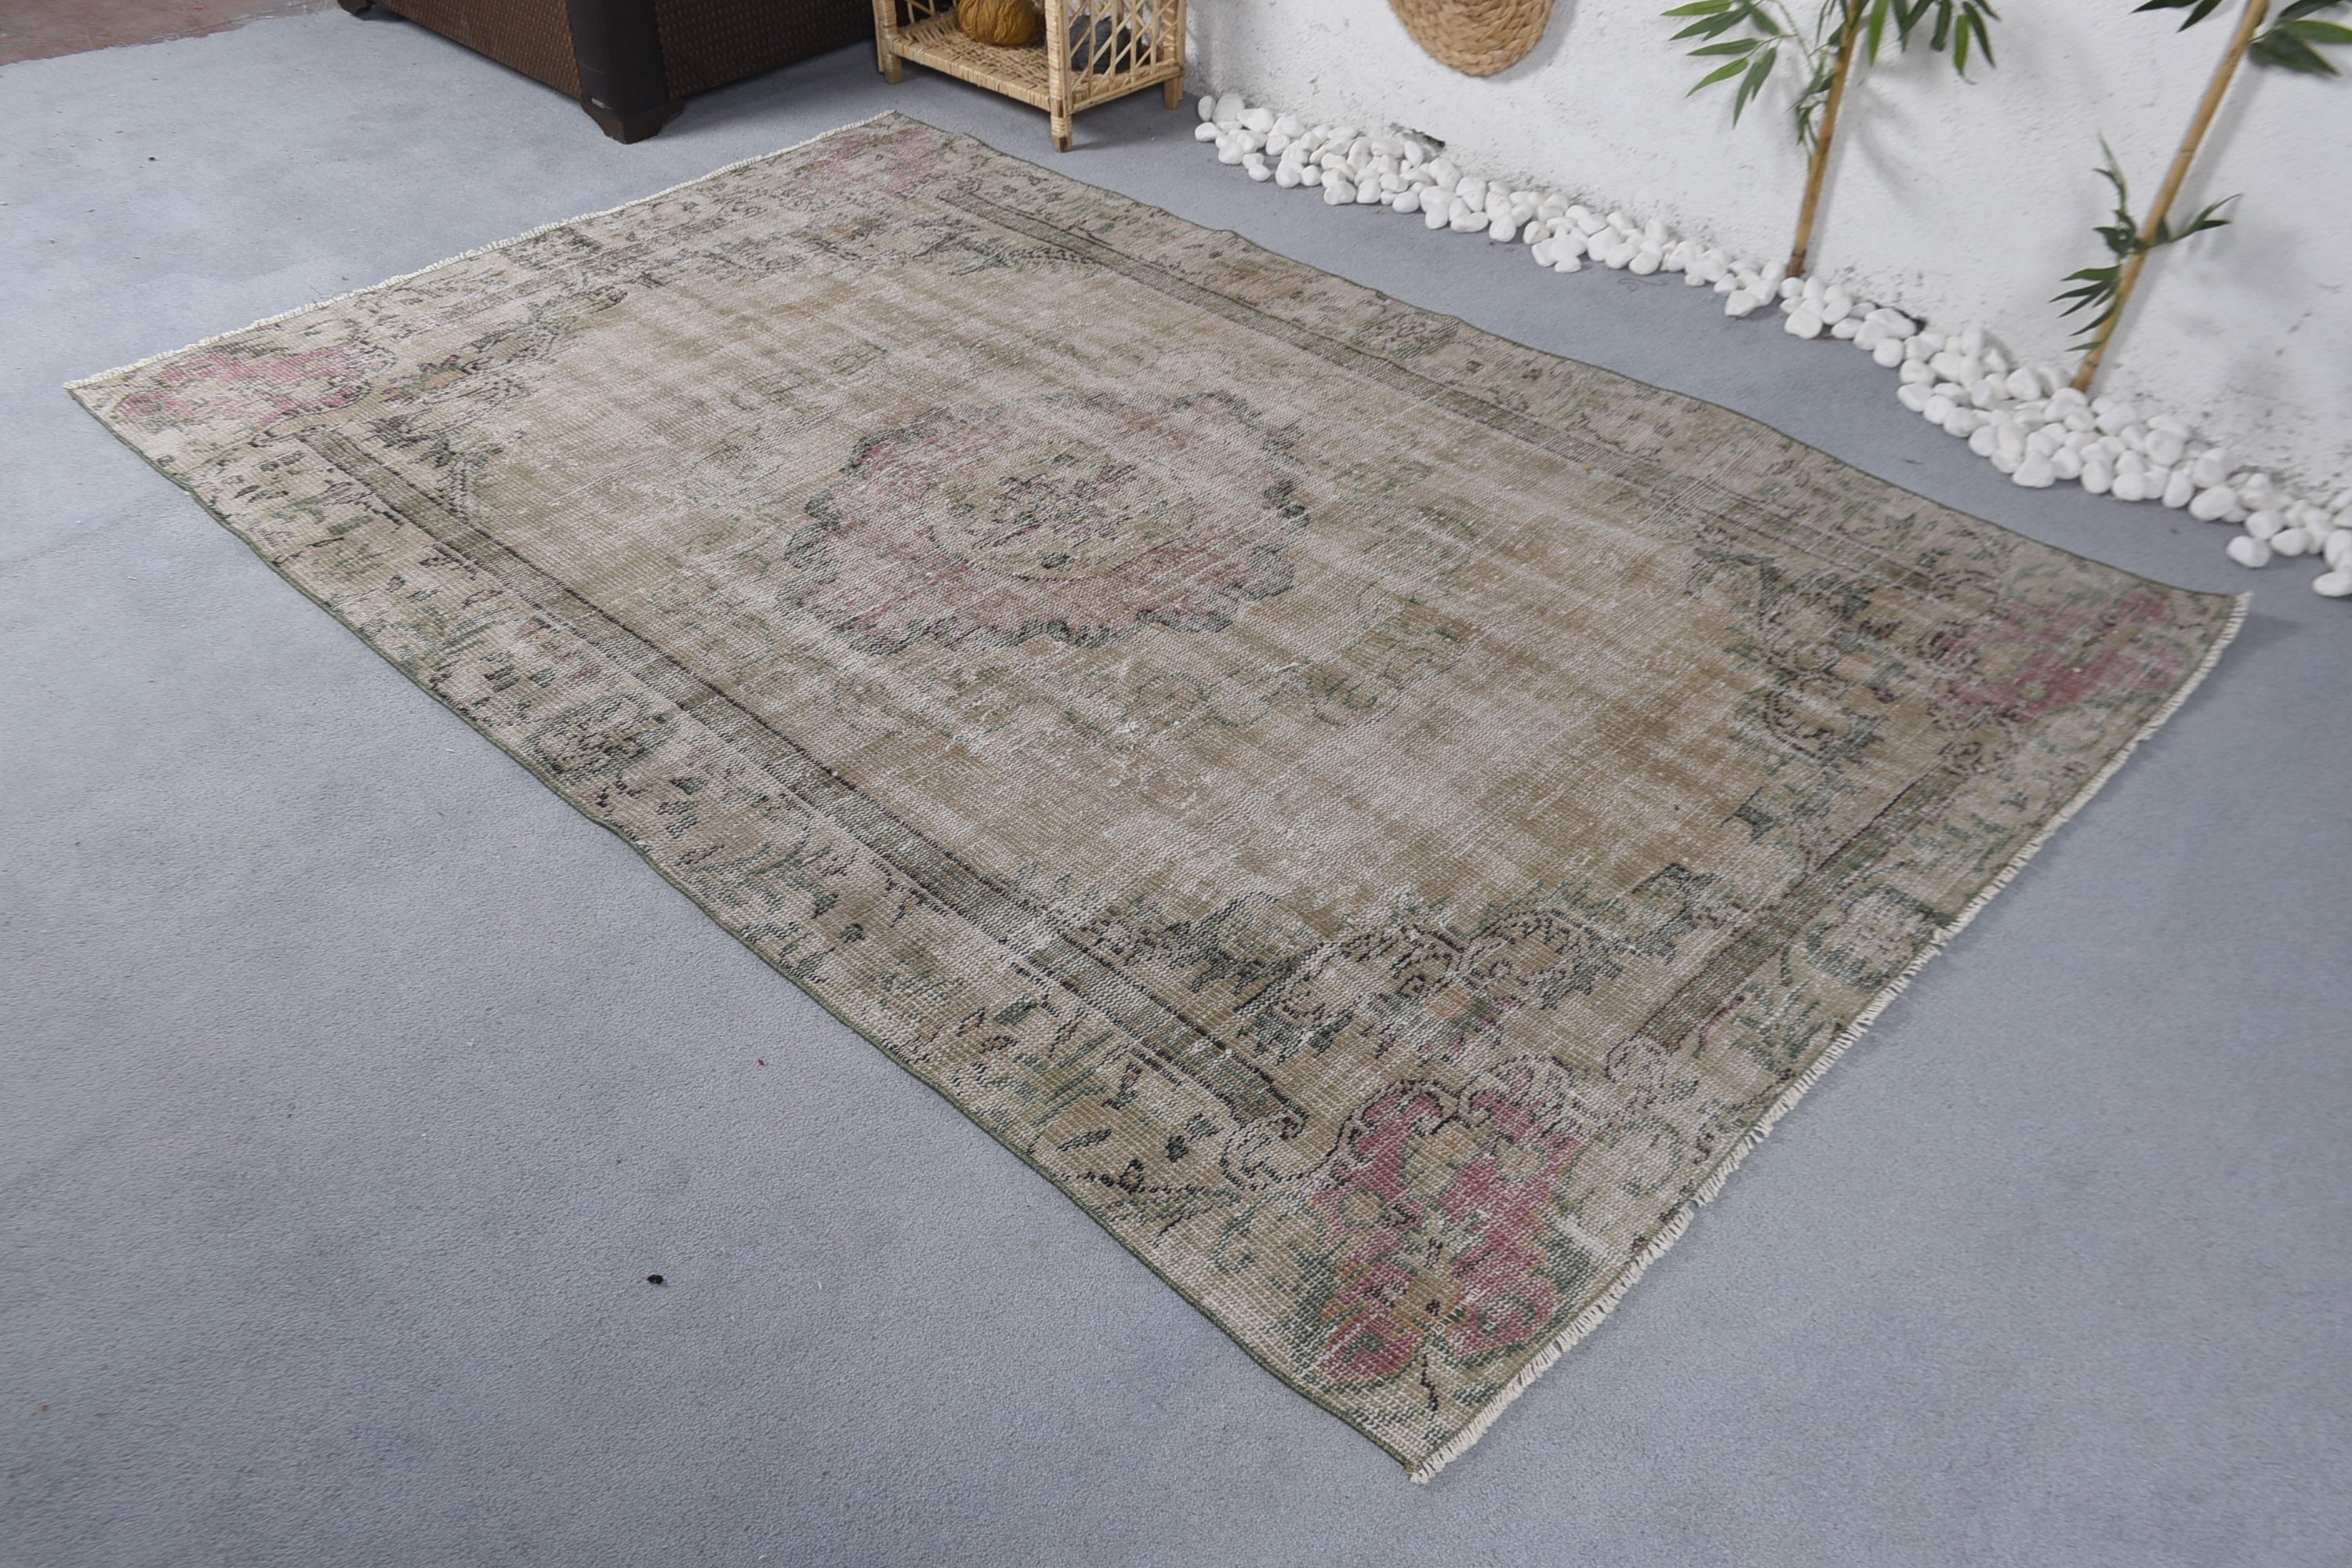 4.8x7.7 ft Area Rug, Green Antique Rugs, Anatolian Rugs, Natural Rugs, Dining Room Rug, Turkish Rug, Antique Rug, Vintage Rug, Kitchen Rug